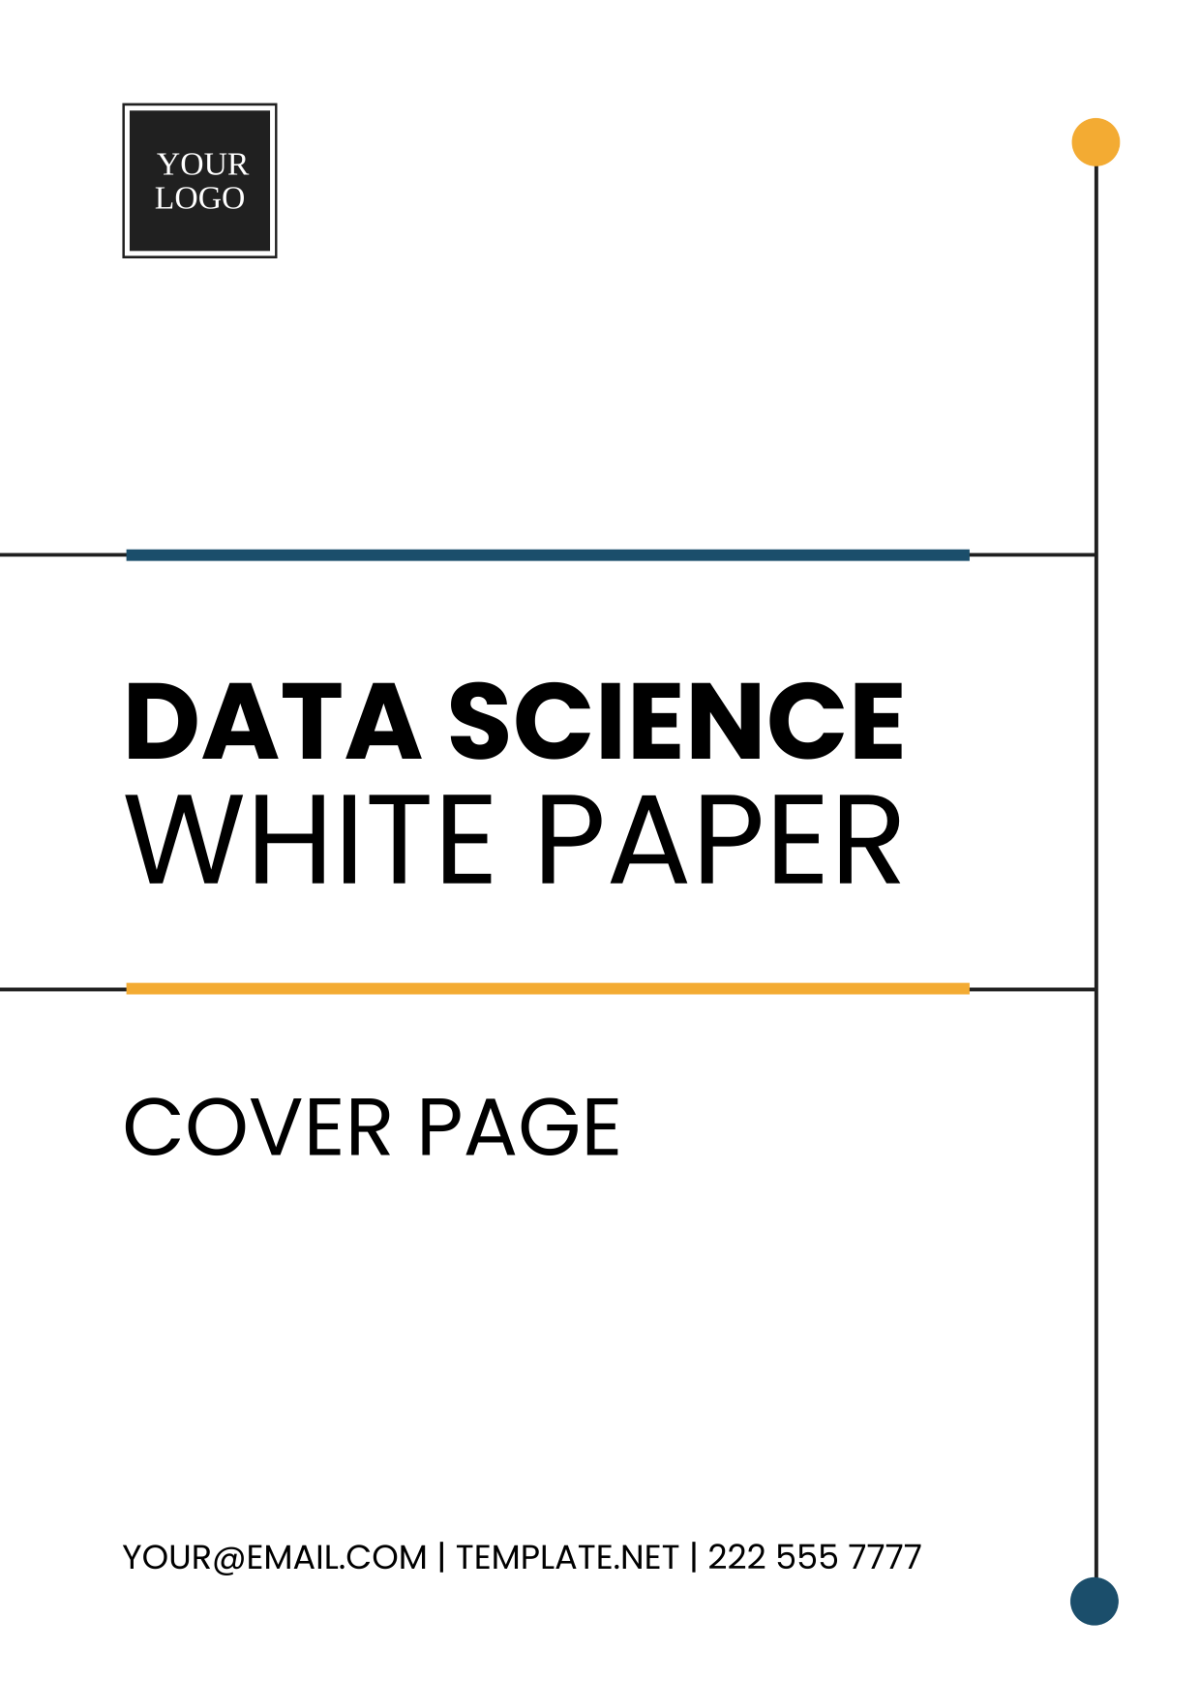 Data Science White Paper Cover Page Template